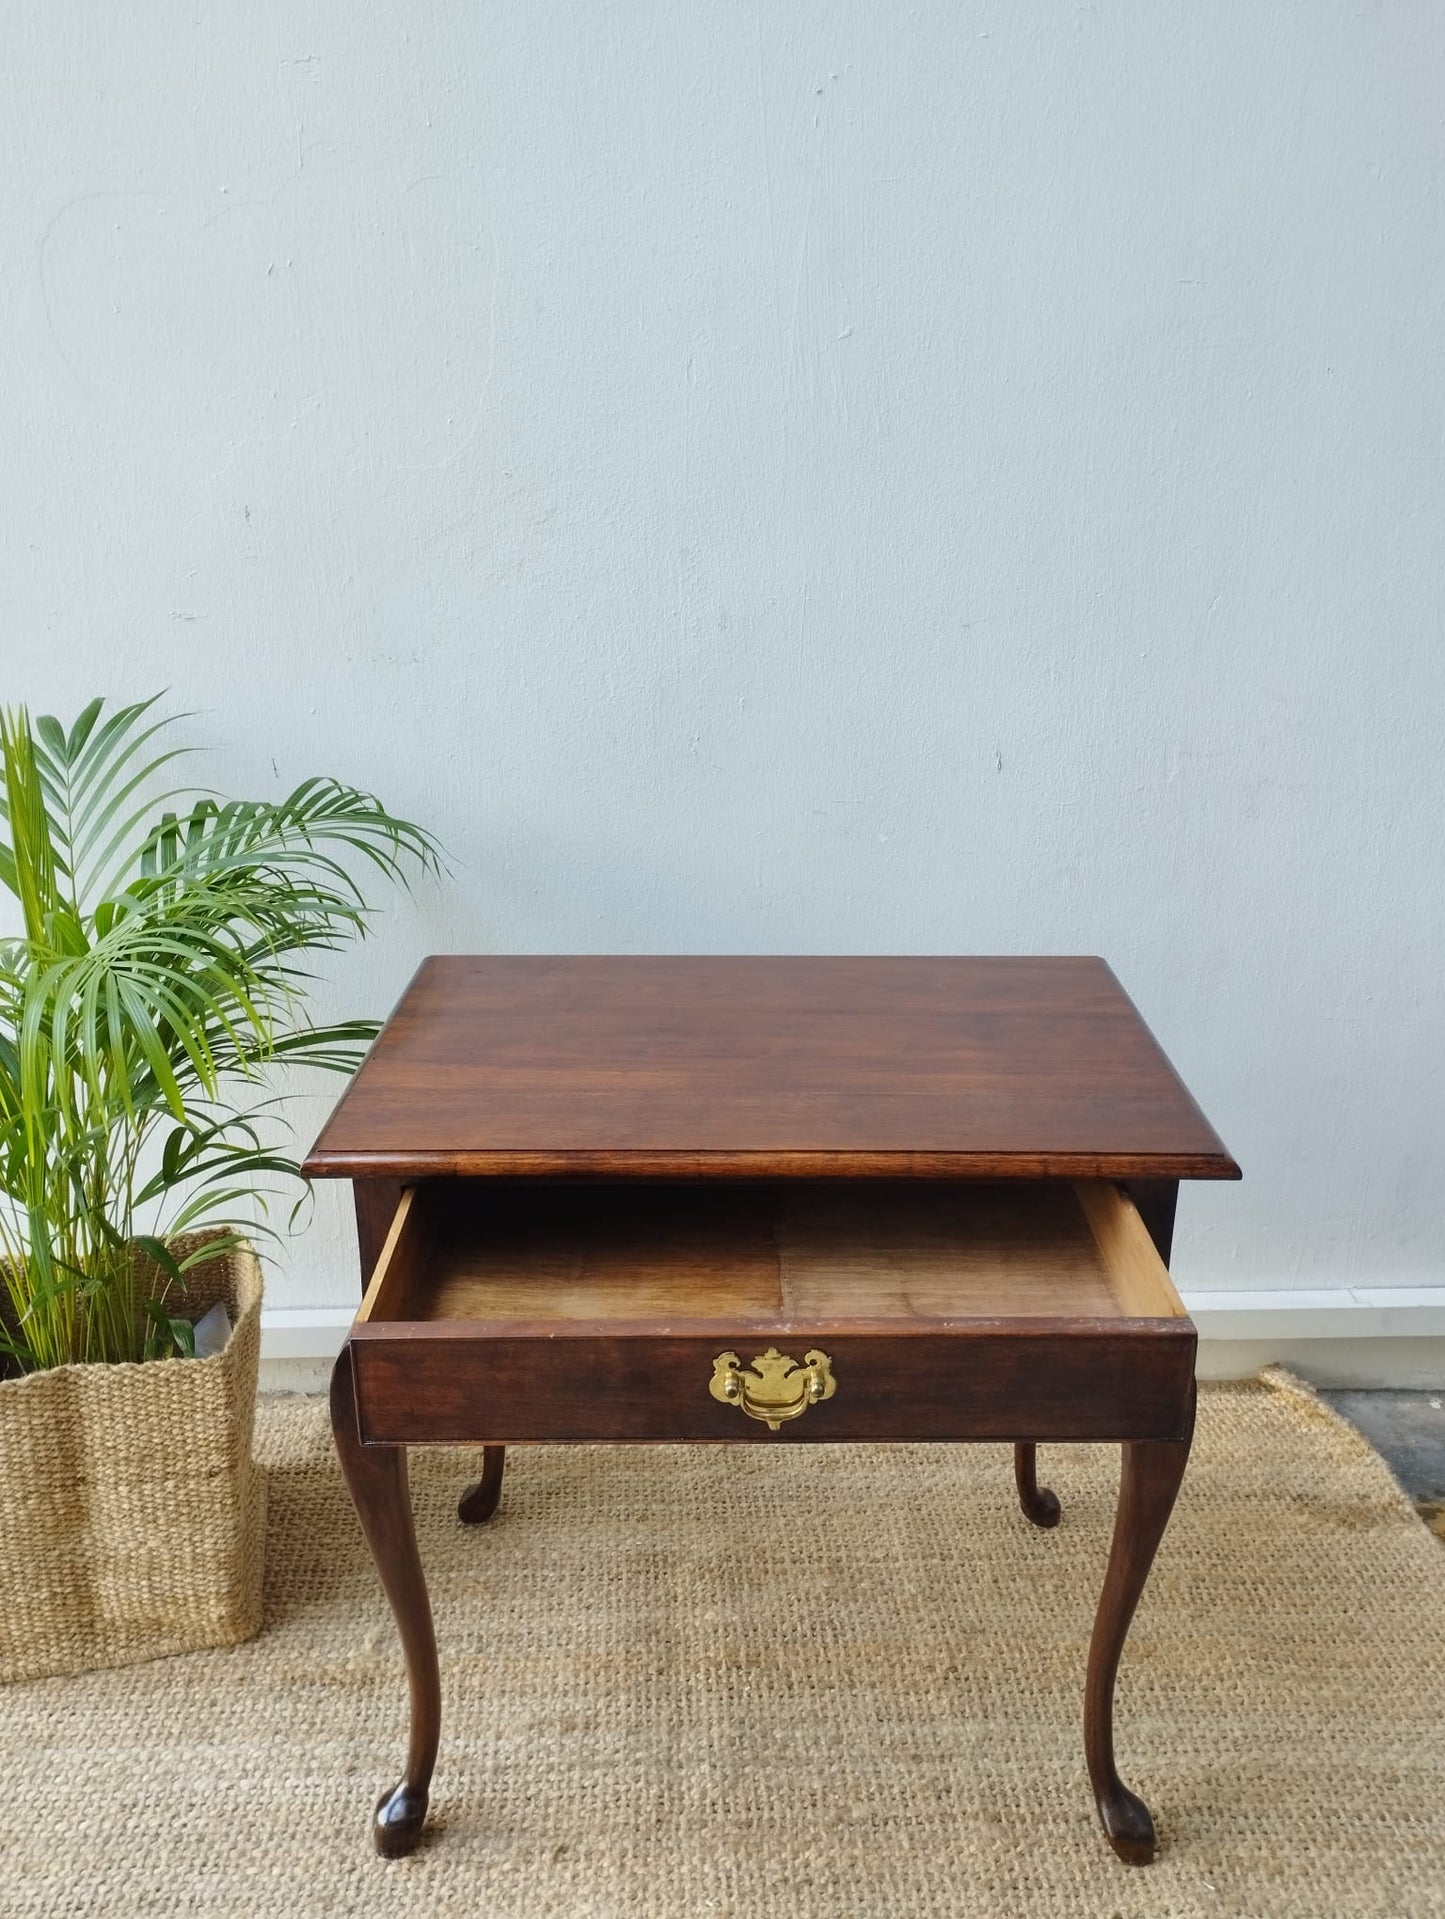 Mahogany Table with cabriole legs